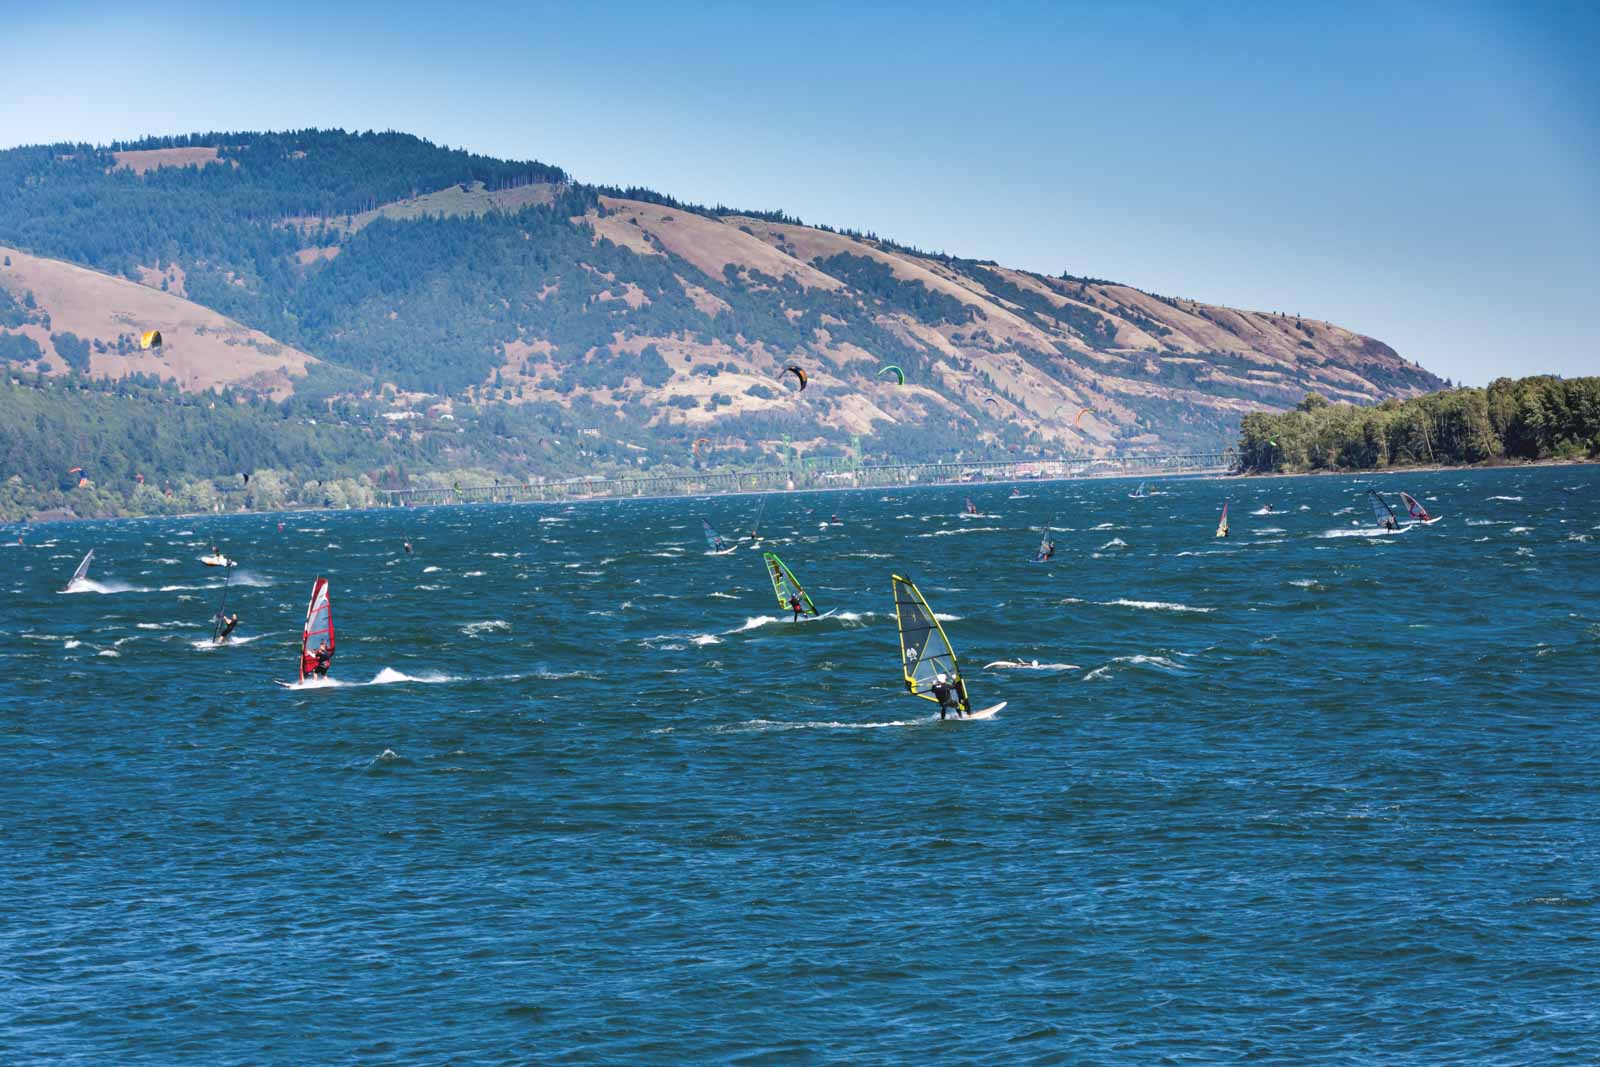 Kitesurfing on the Columbia River Gorge is one of the best things to do in Washington!